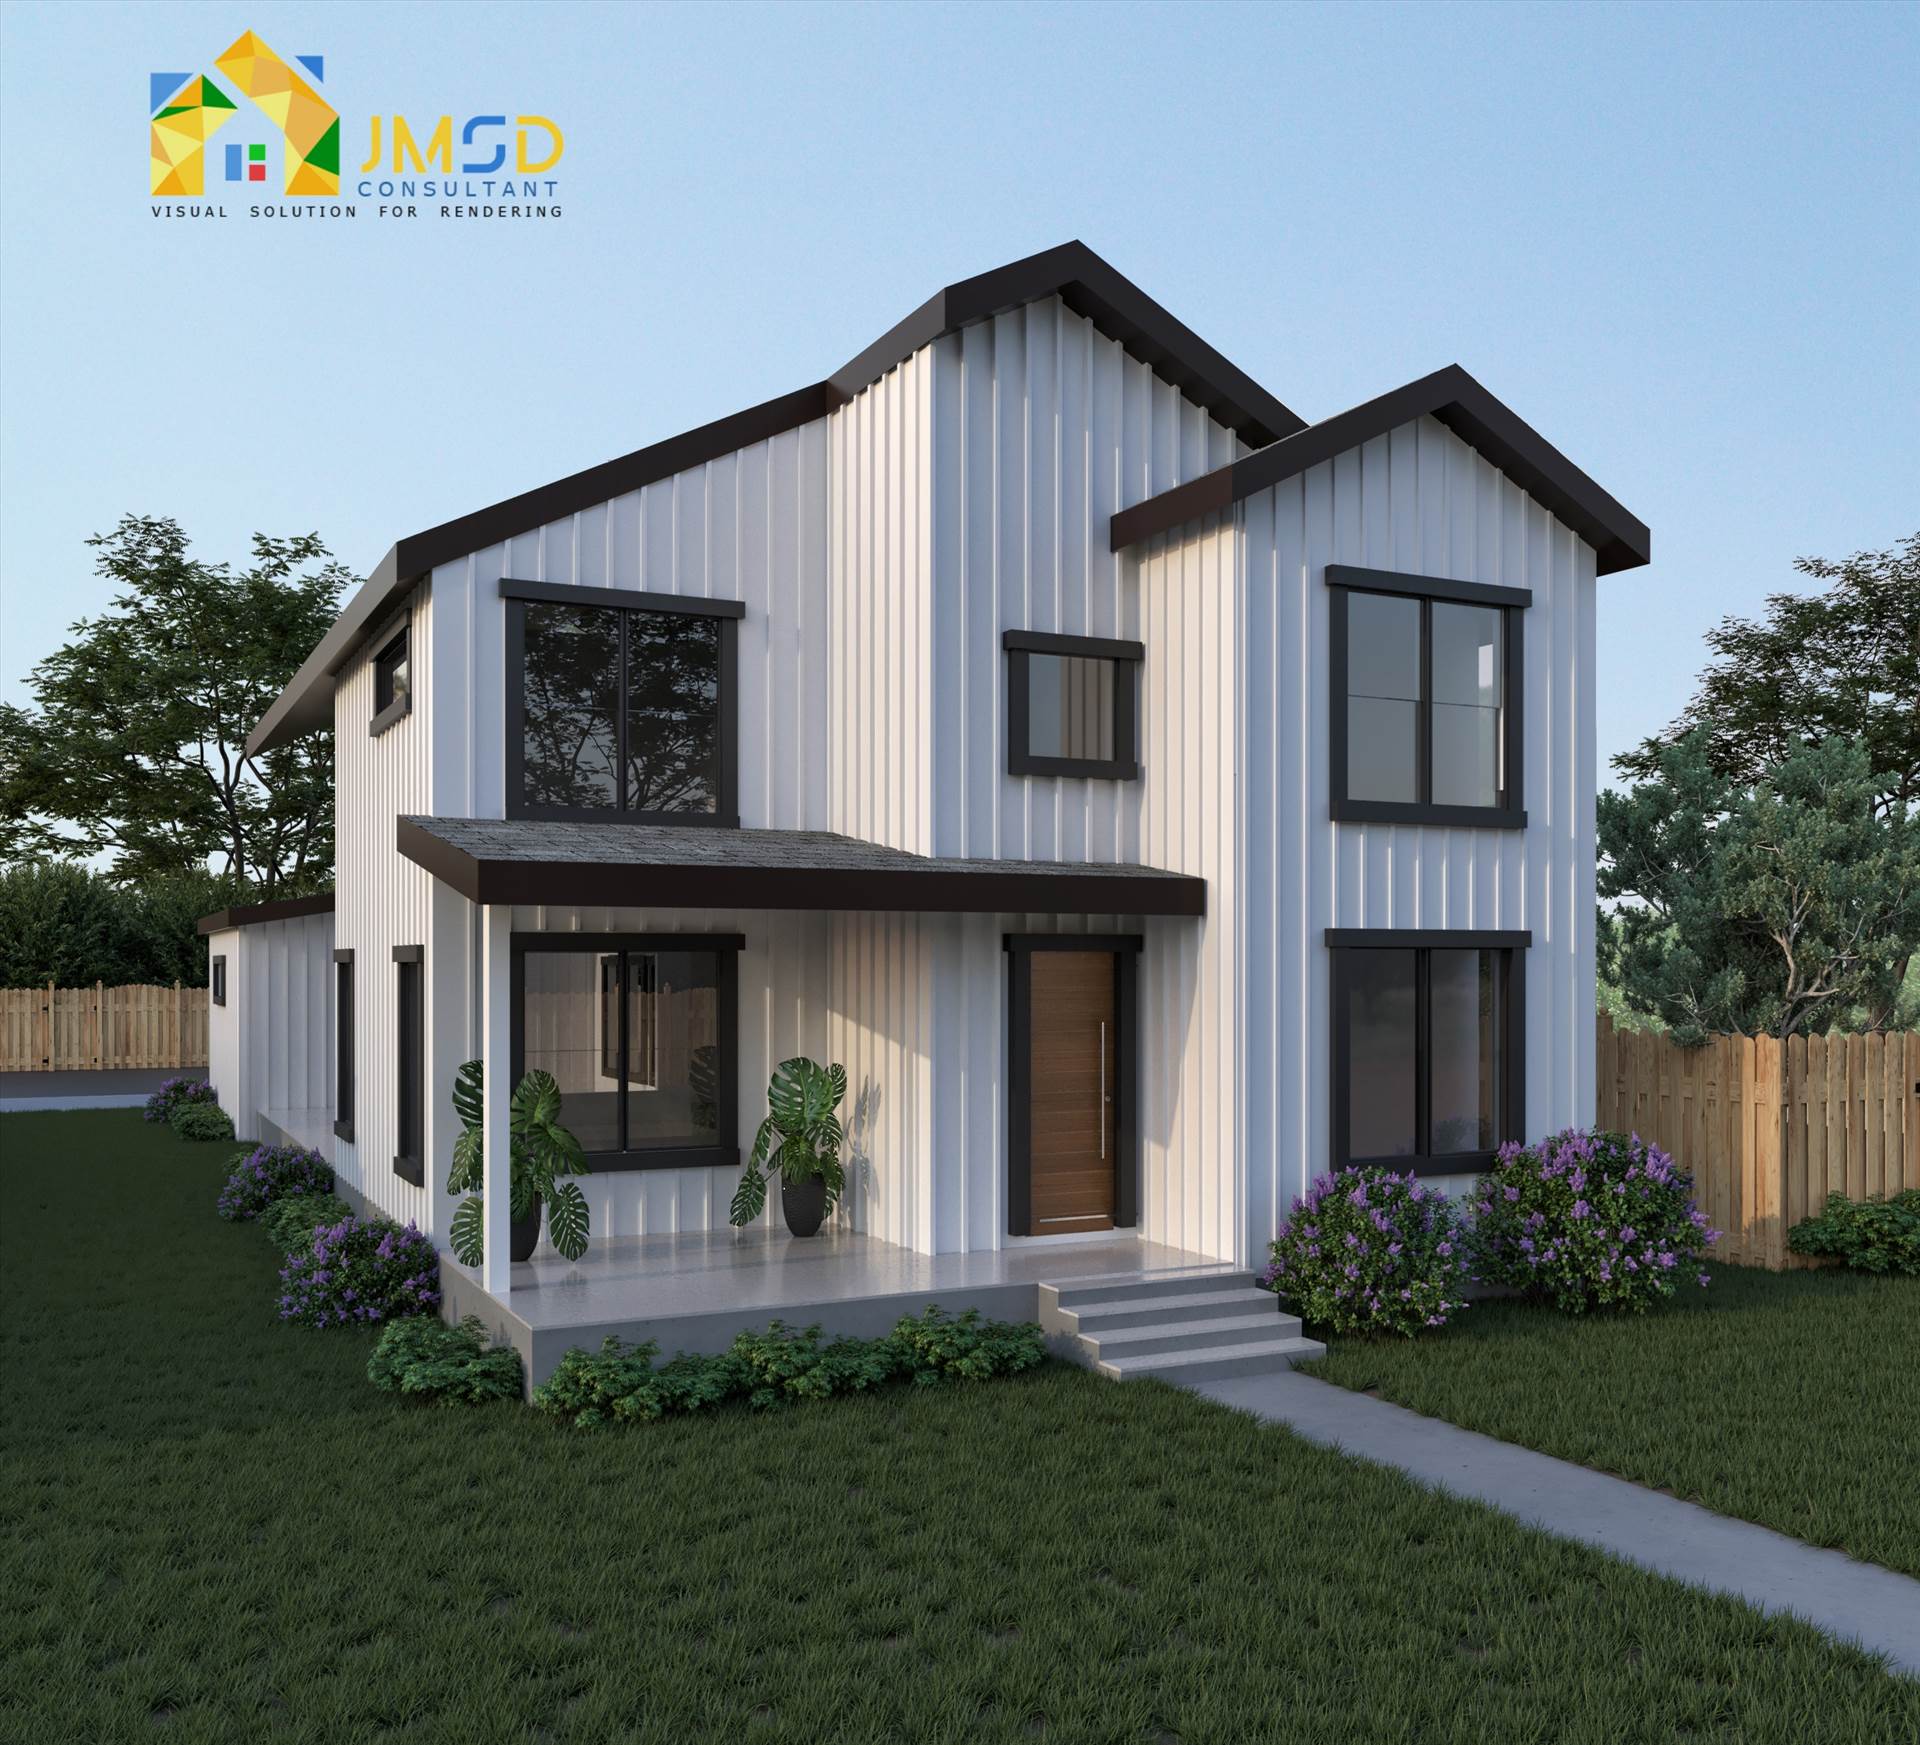 3D Rendering for Single Family Home Wheat Ridge Colorado Single Family Home Renderings Wheat Ridge Colorado. Give your clients the opportunity to immerse into every designs detail before the project is built.  by JMSDCONSULTANT